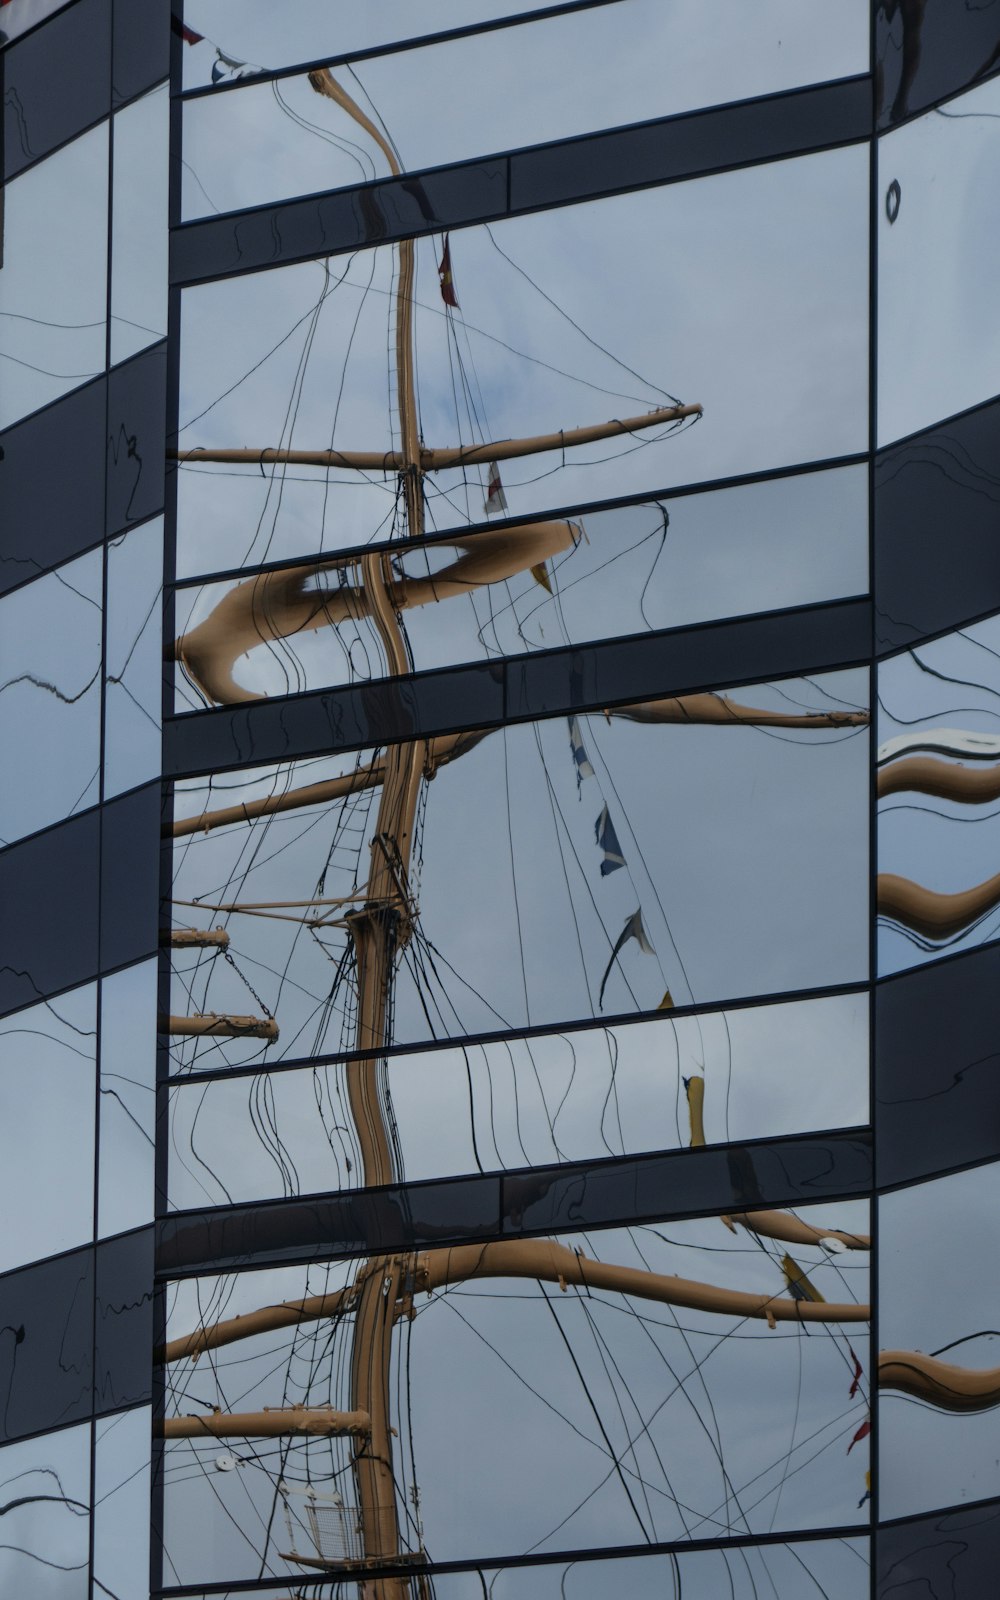 a reflection of a ship in a building's windows